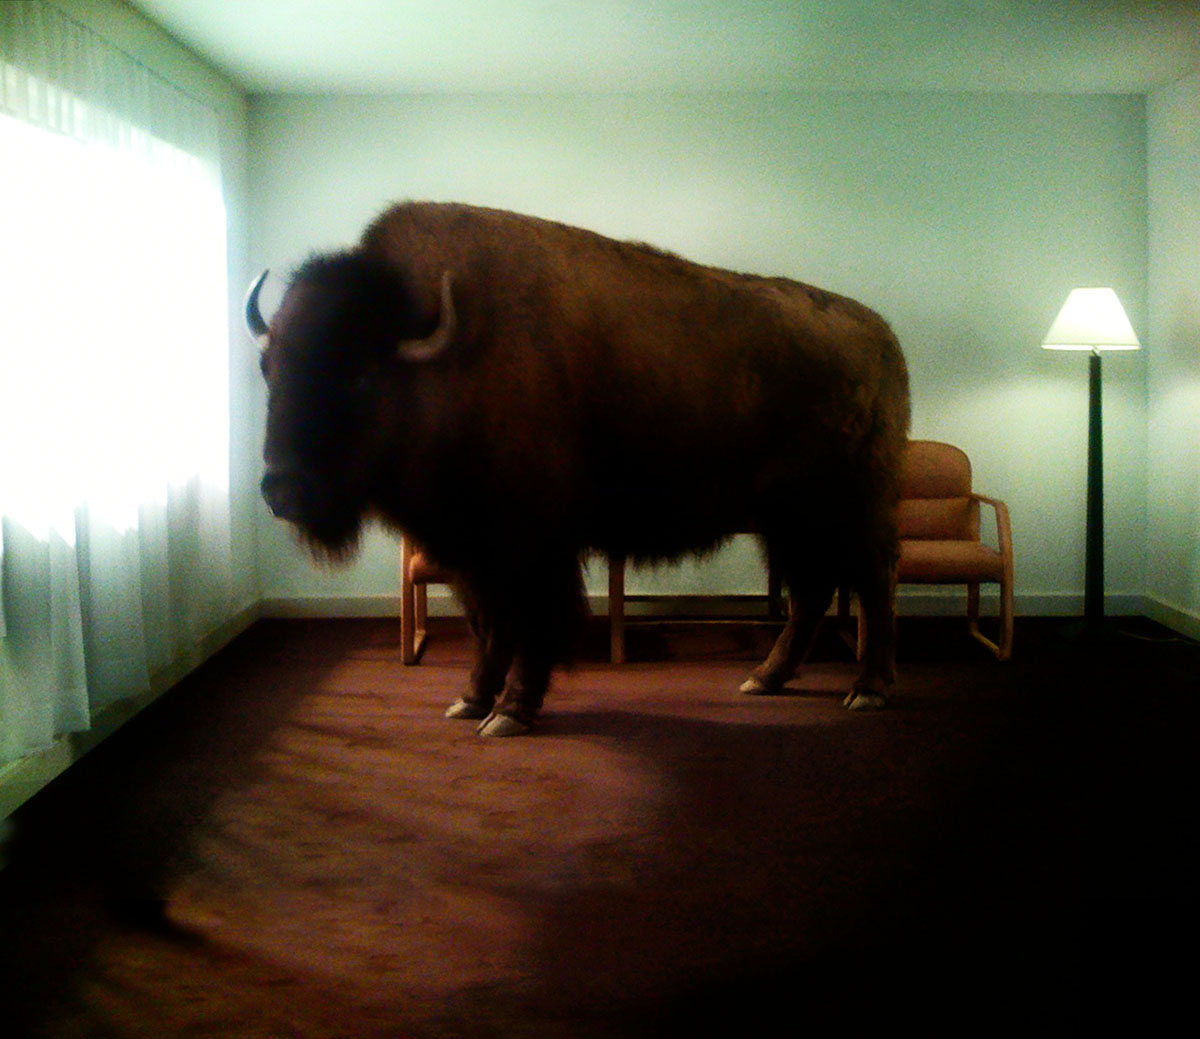 A large bufflo stands in a motel room in front of two chairs, curtains are drawn over the large window next to the animal and a lit floor lamp is visible behind them